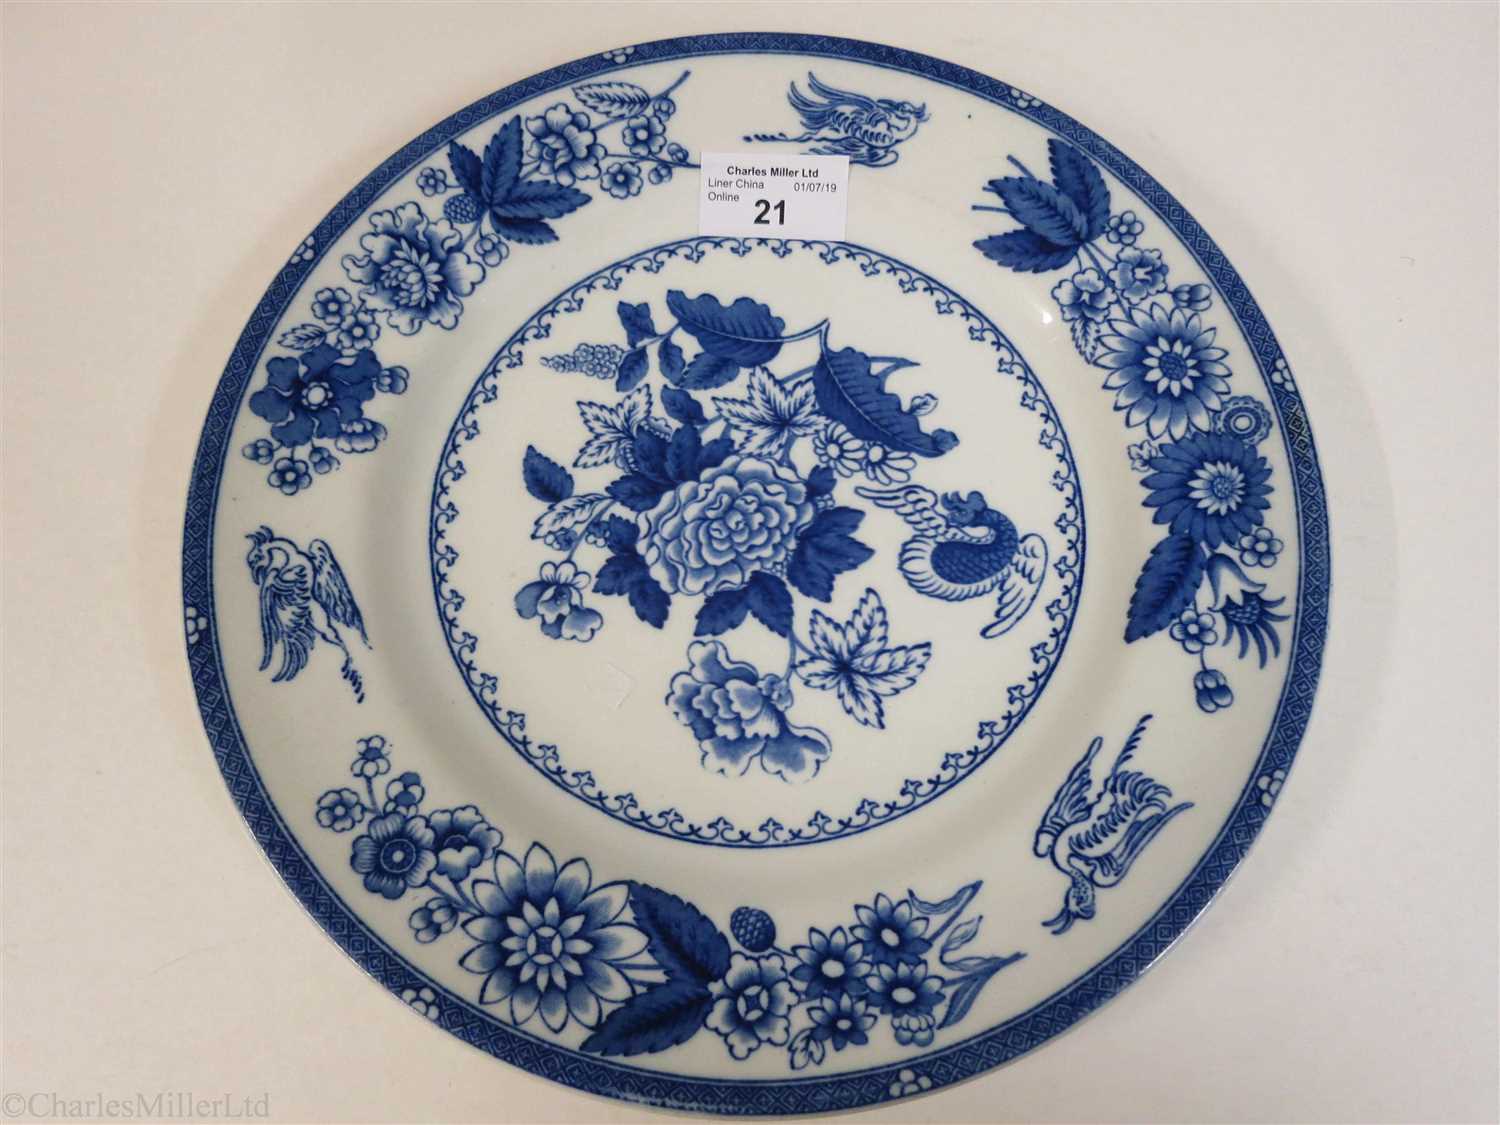 Lot 21 - CANADIAN PACIFIC: A ‘HERON’ PATTERN CHINA DINNER PLATE BY COPELAND, ENGLAND, CIRCA 1913